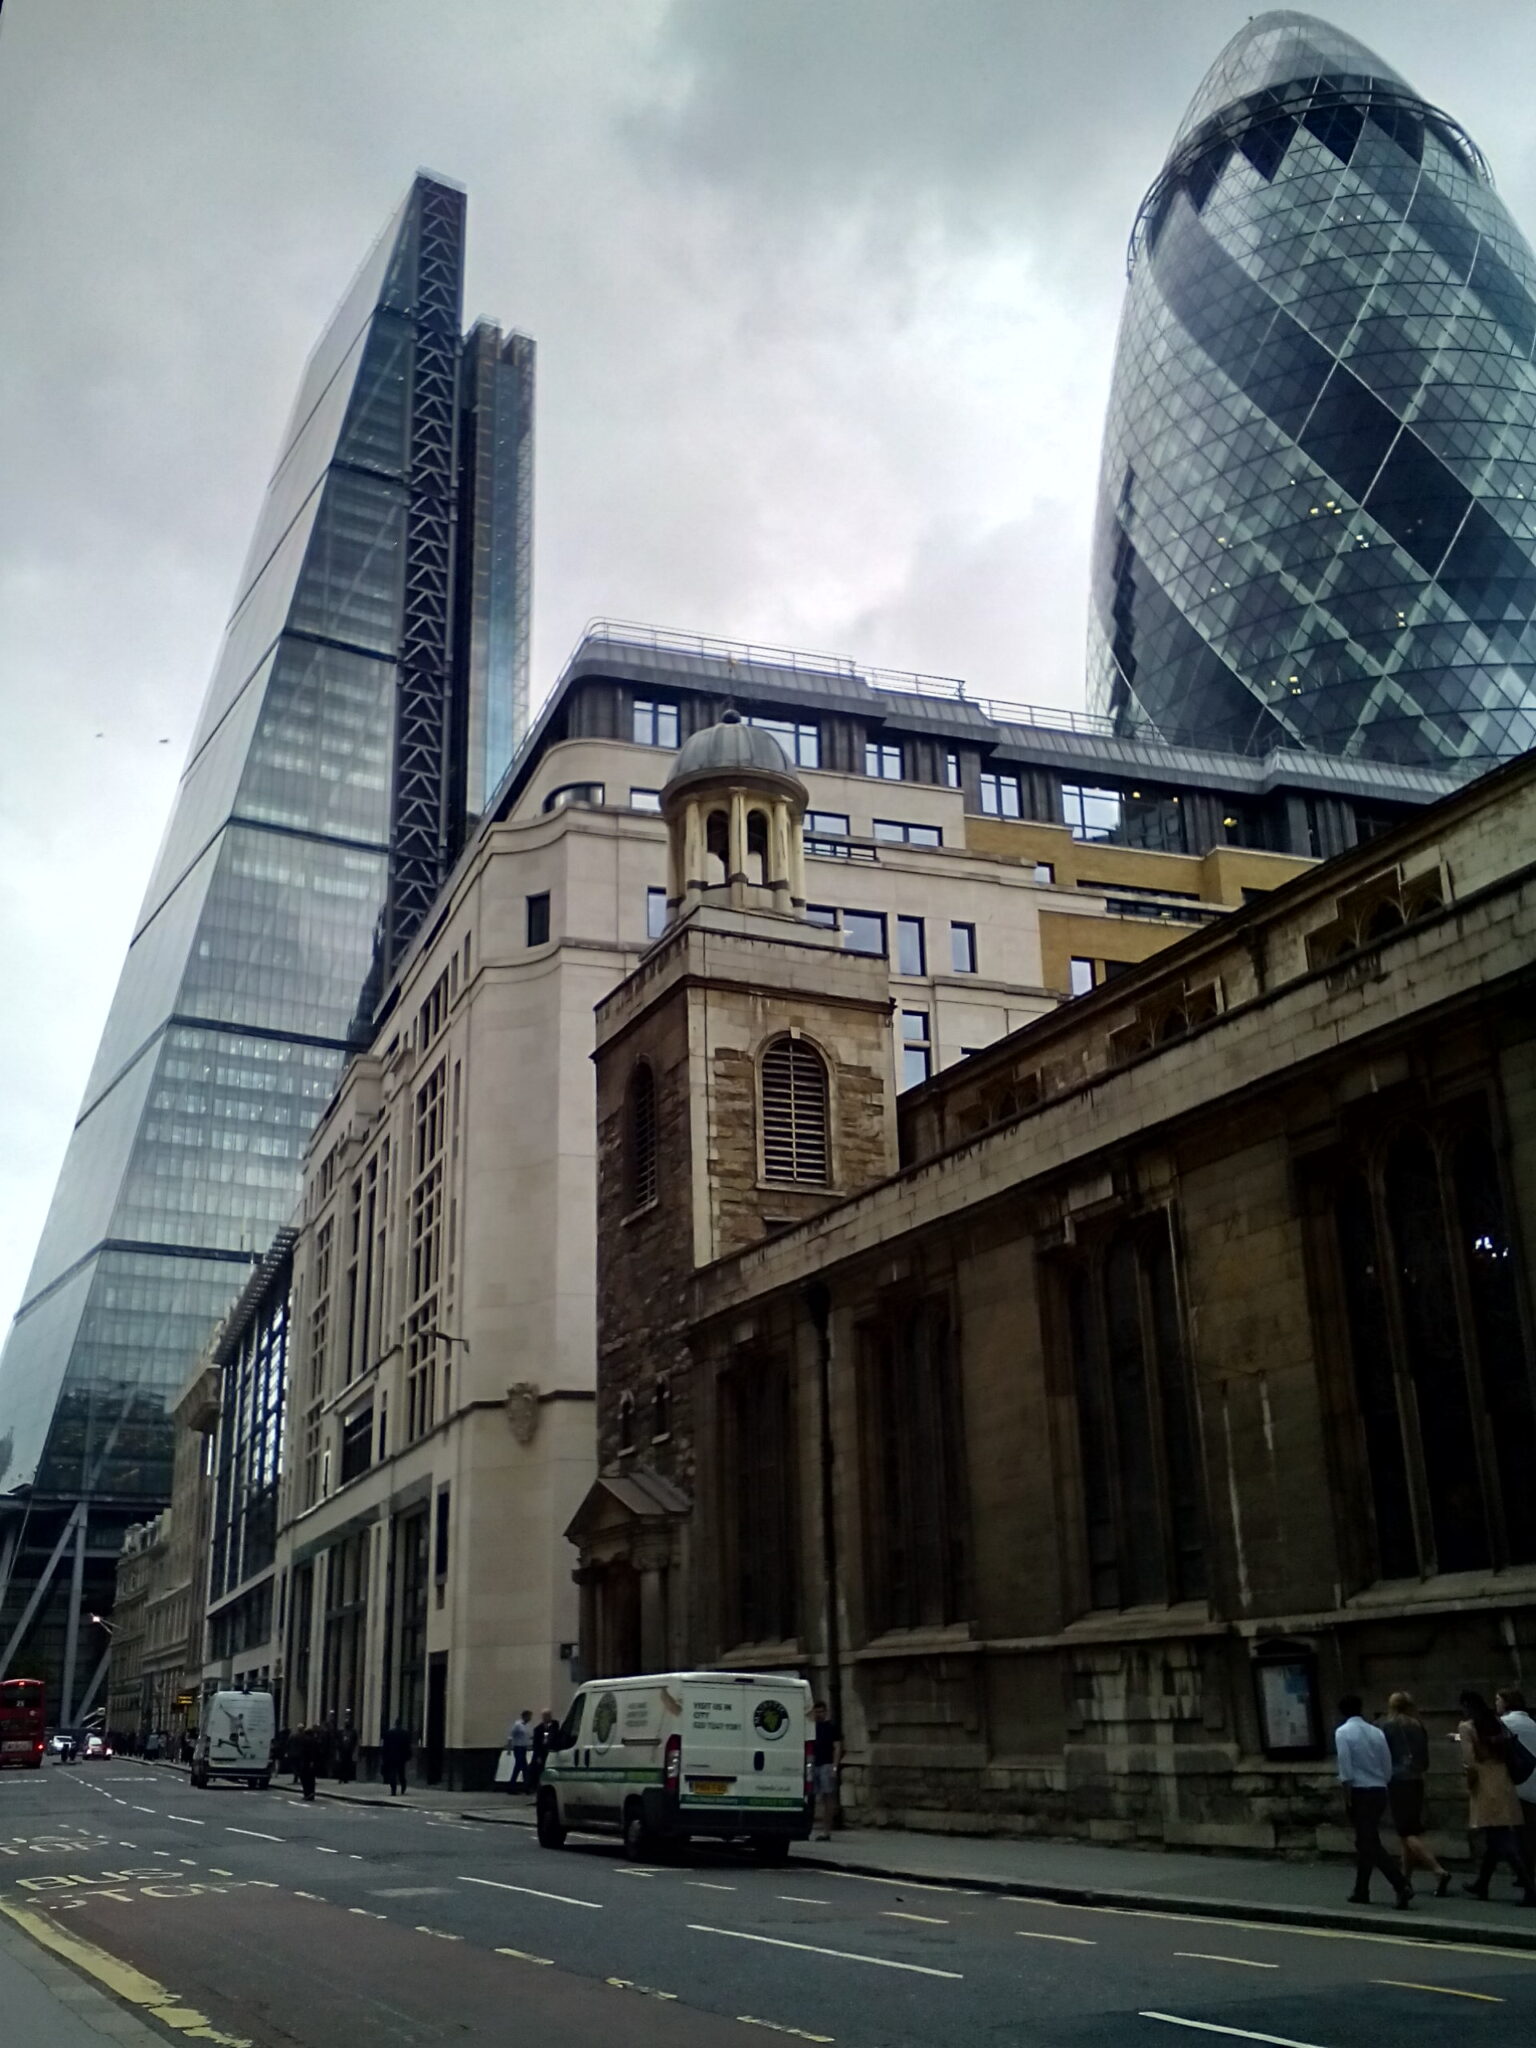 Leadenhall and The Gherkin as viewed from the street.